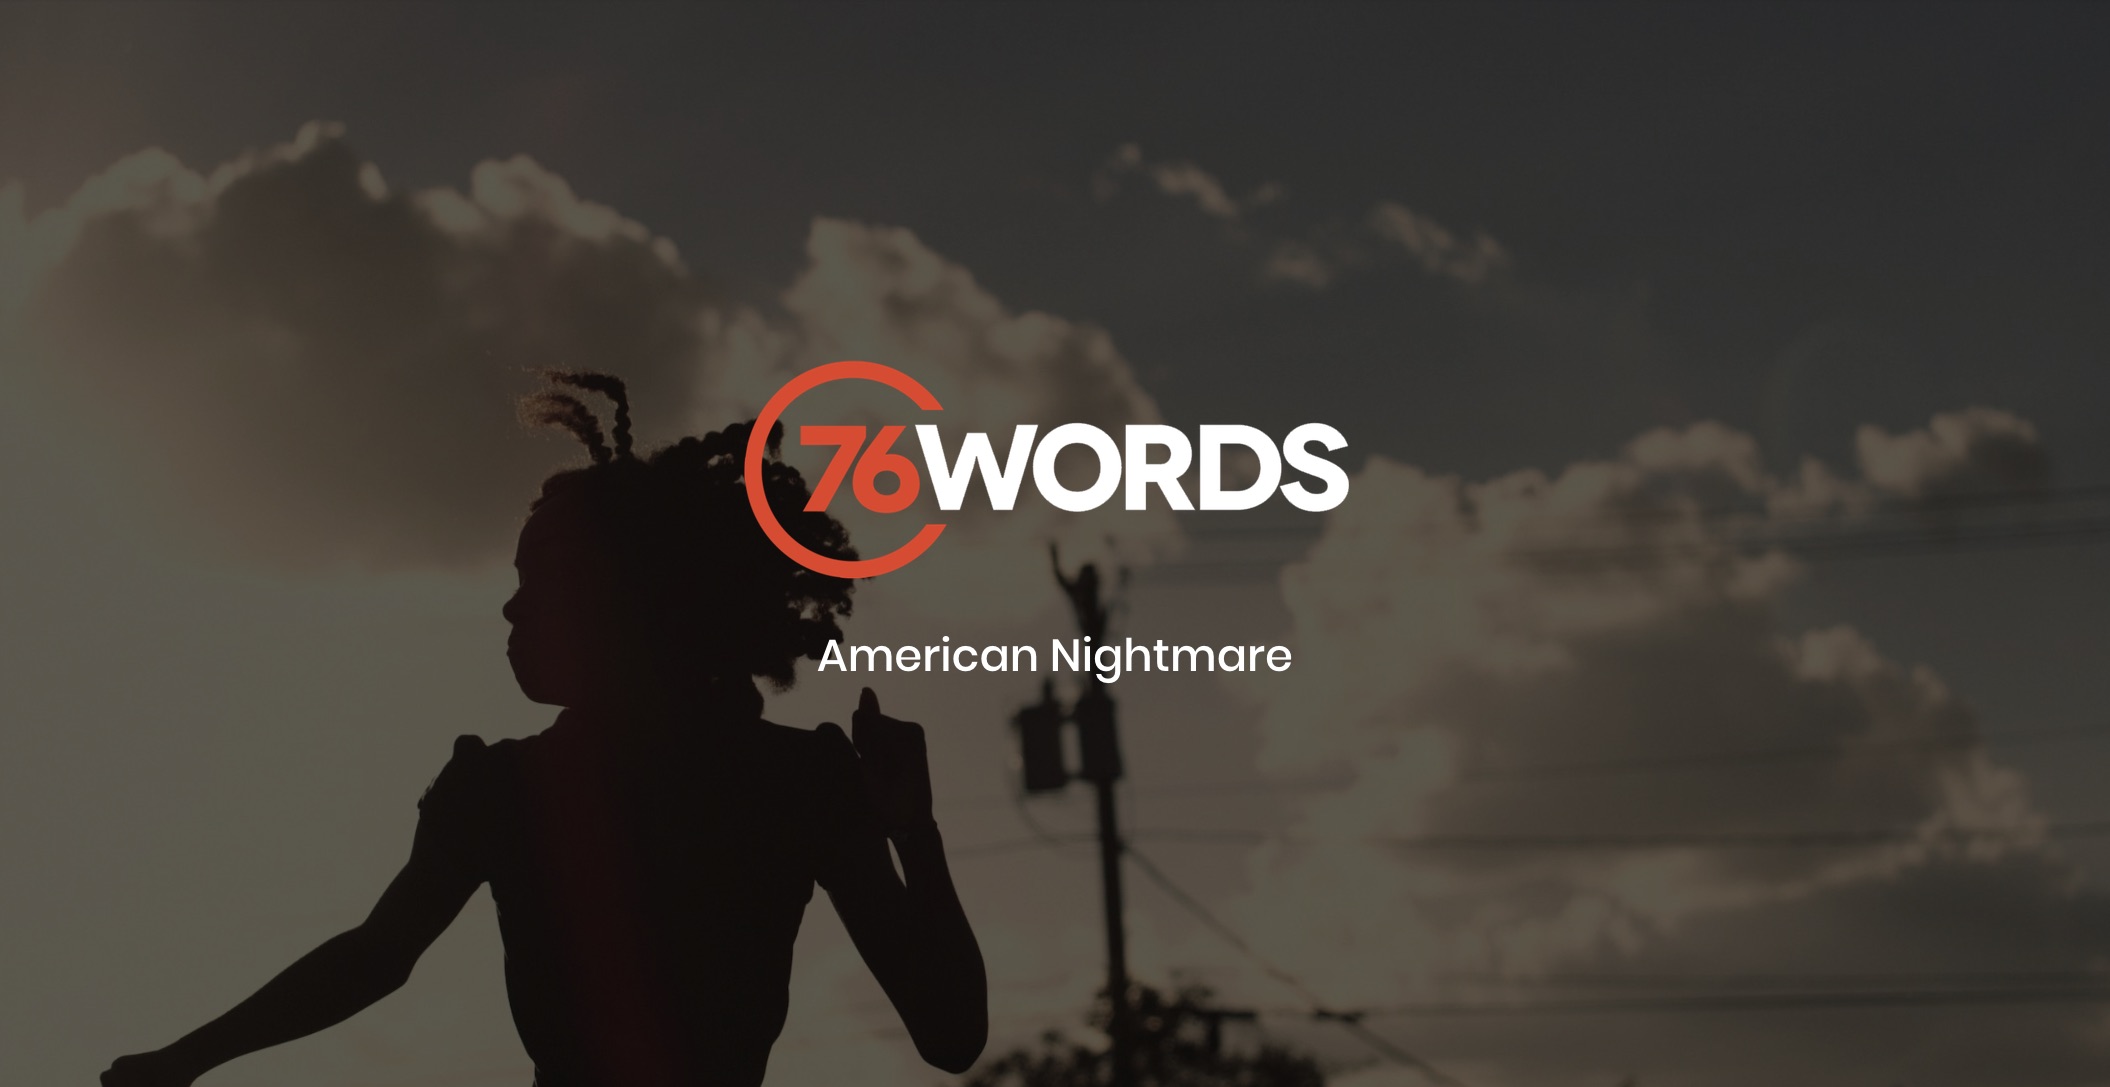 White and orange 76 words American Nightmare logo with dimmed background showing silhouette of a young girl with dreadlocks posing for the camera looking sideways